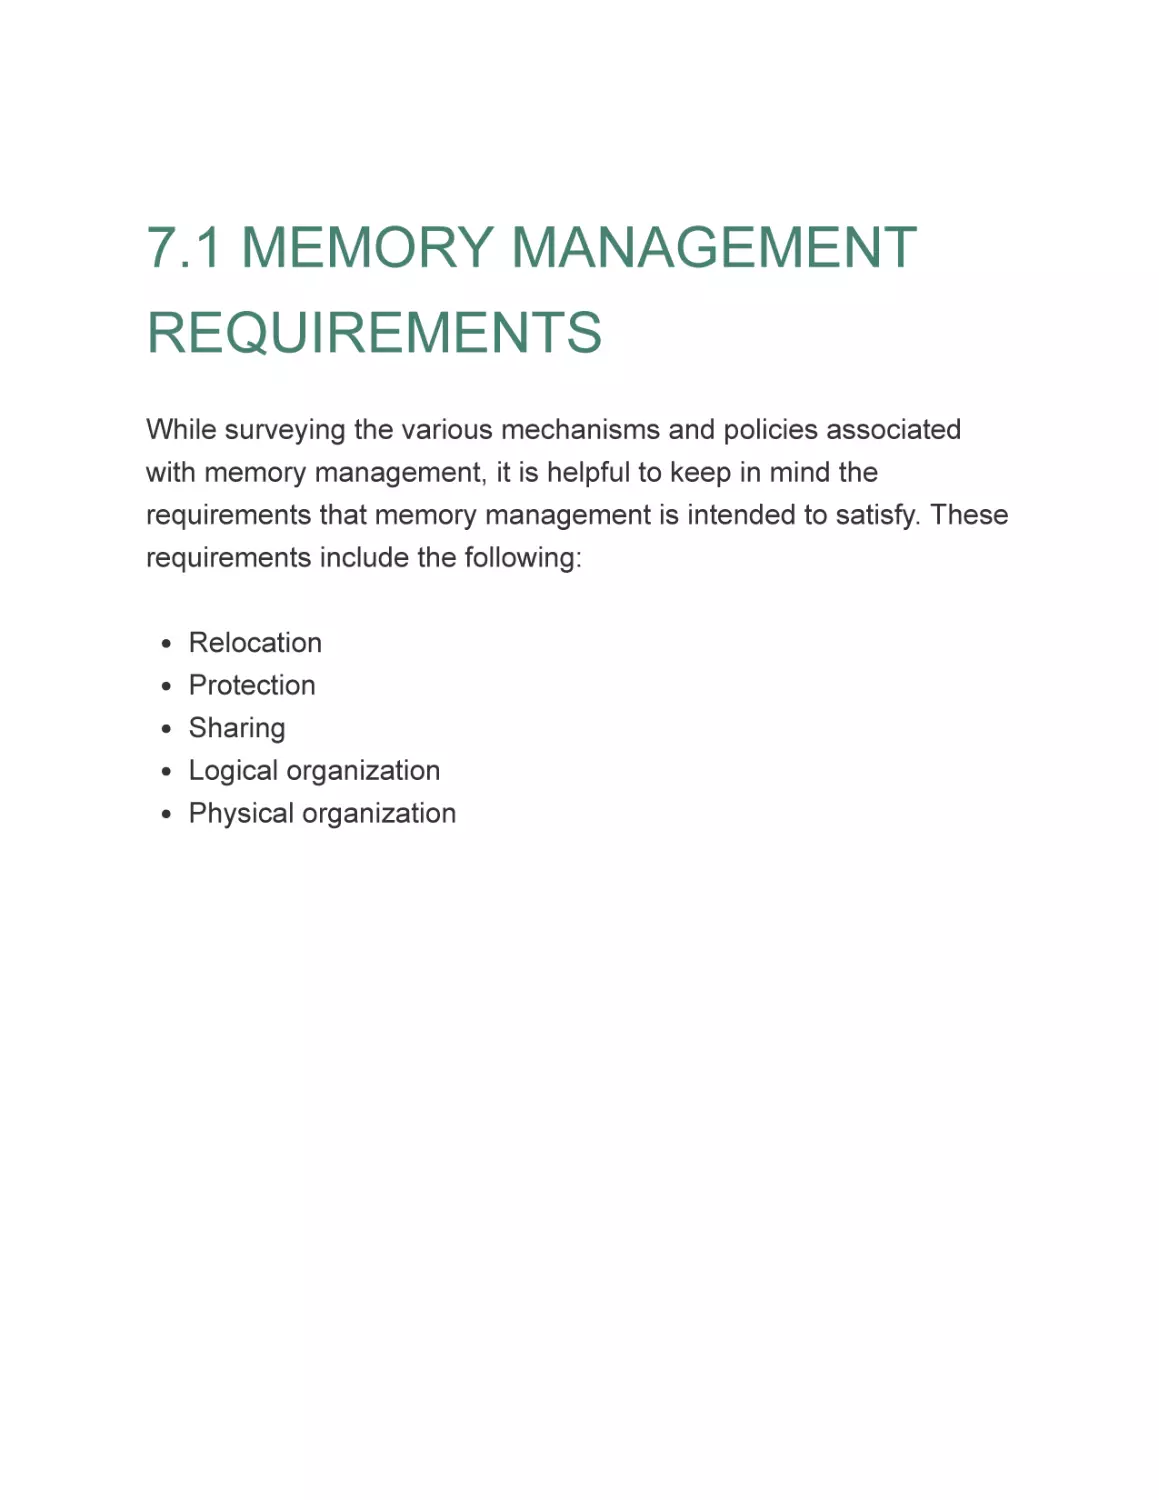 7.1 MEMORY MANAGEMENT REQUIREMENTS